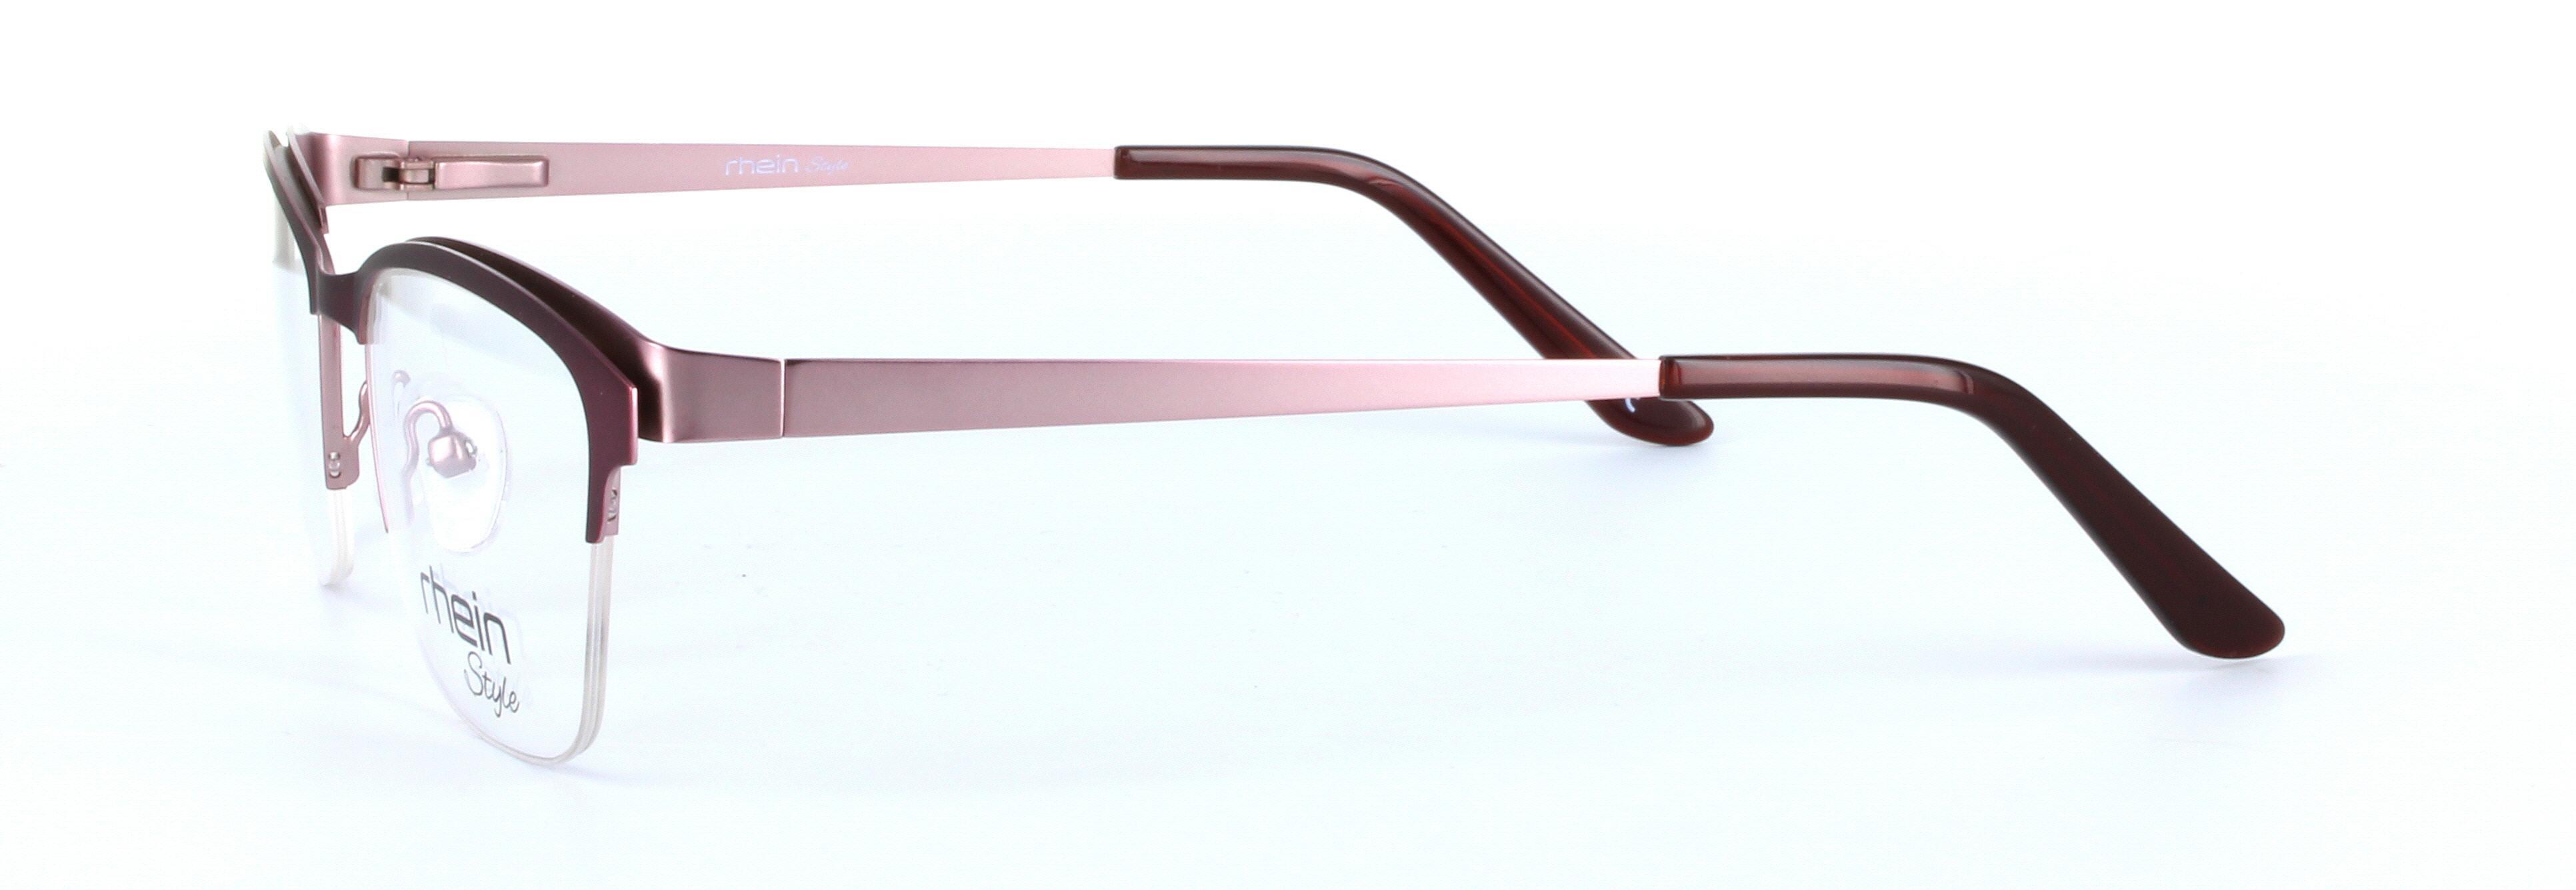 Andrea Red and Pink Semi Rimless Oval Metal Glasses - Image View 2